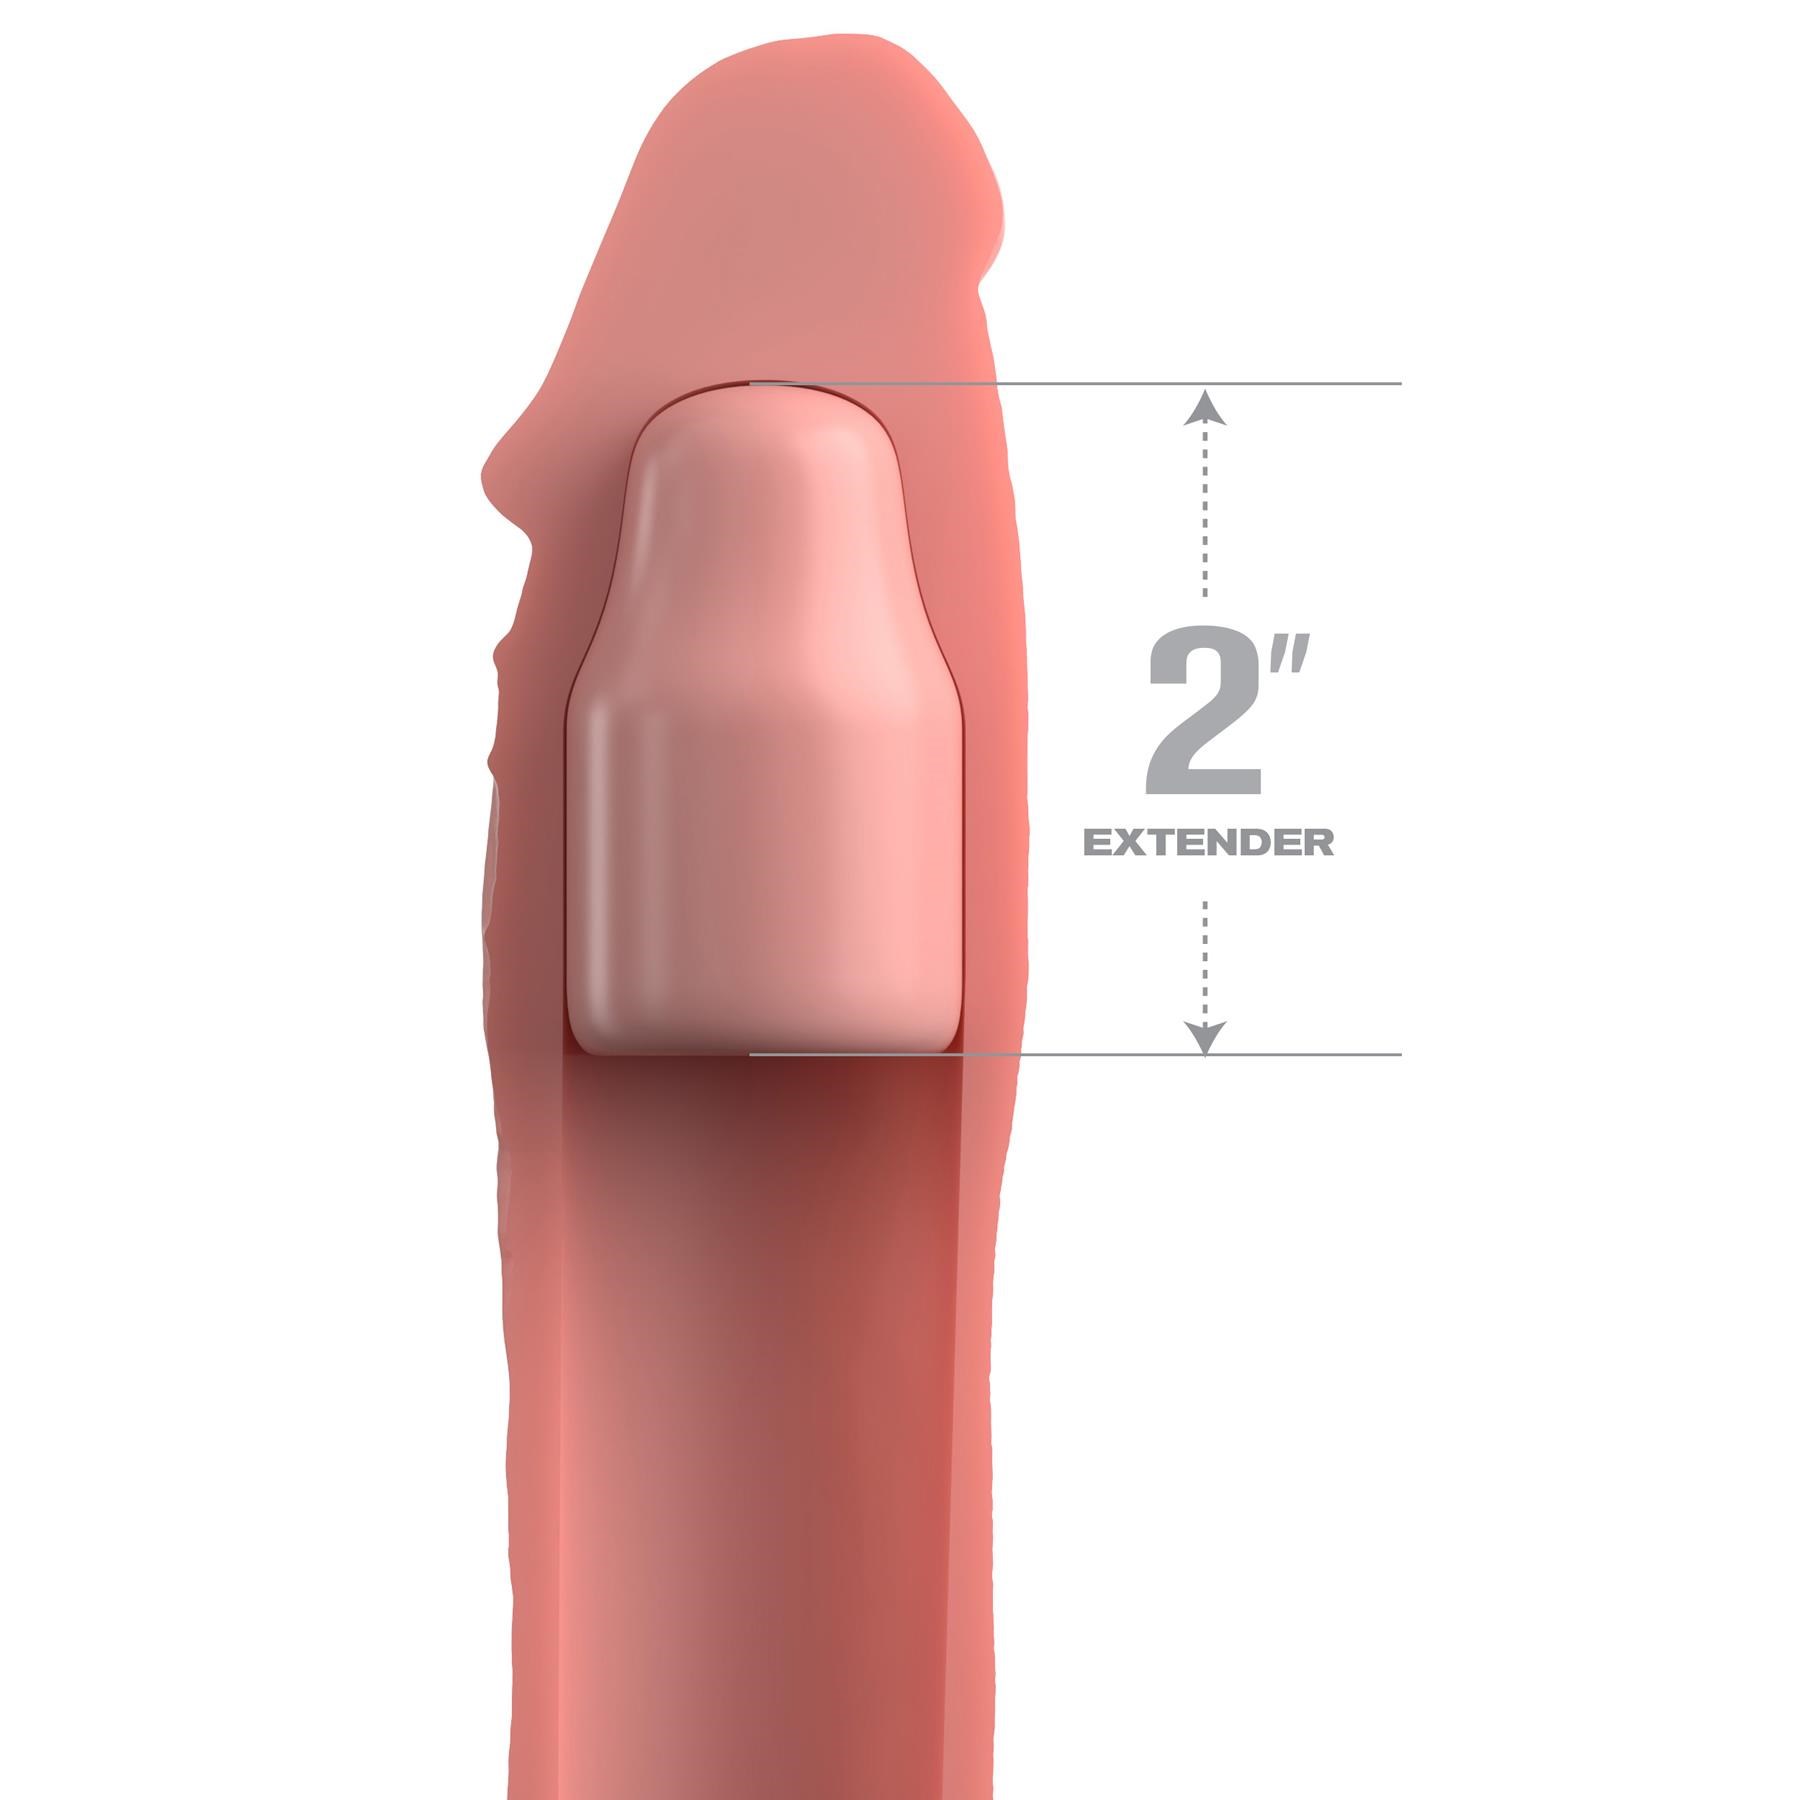 Fantasy X-Tensions Elite 2" Silicone Extension - Inside Showing Extension Tip - White